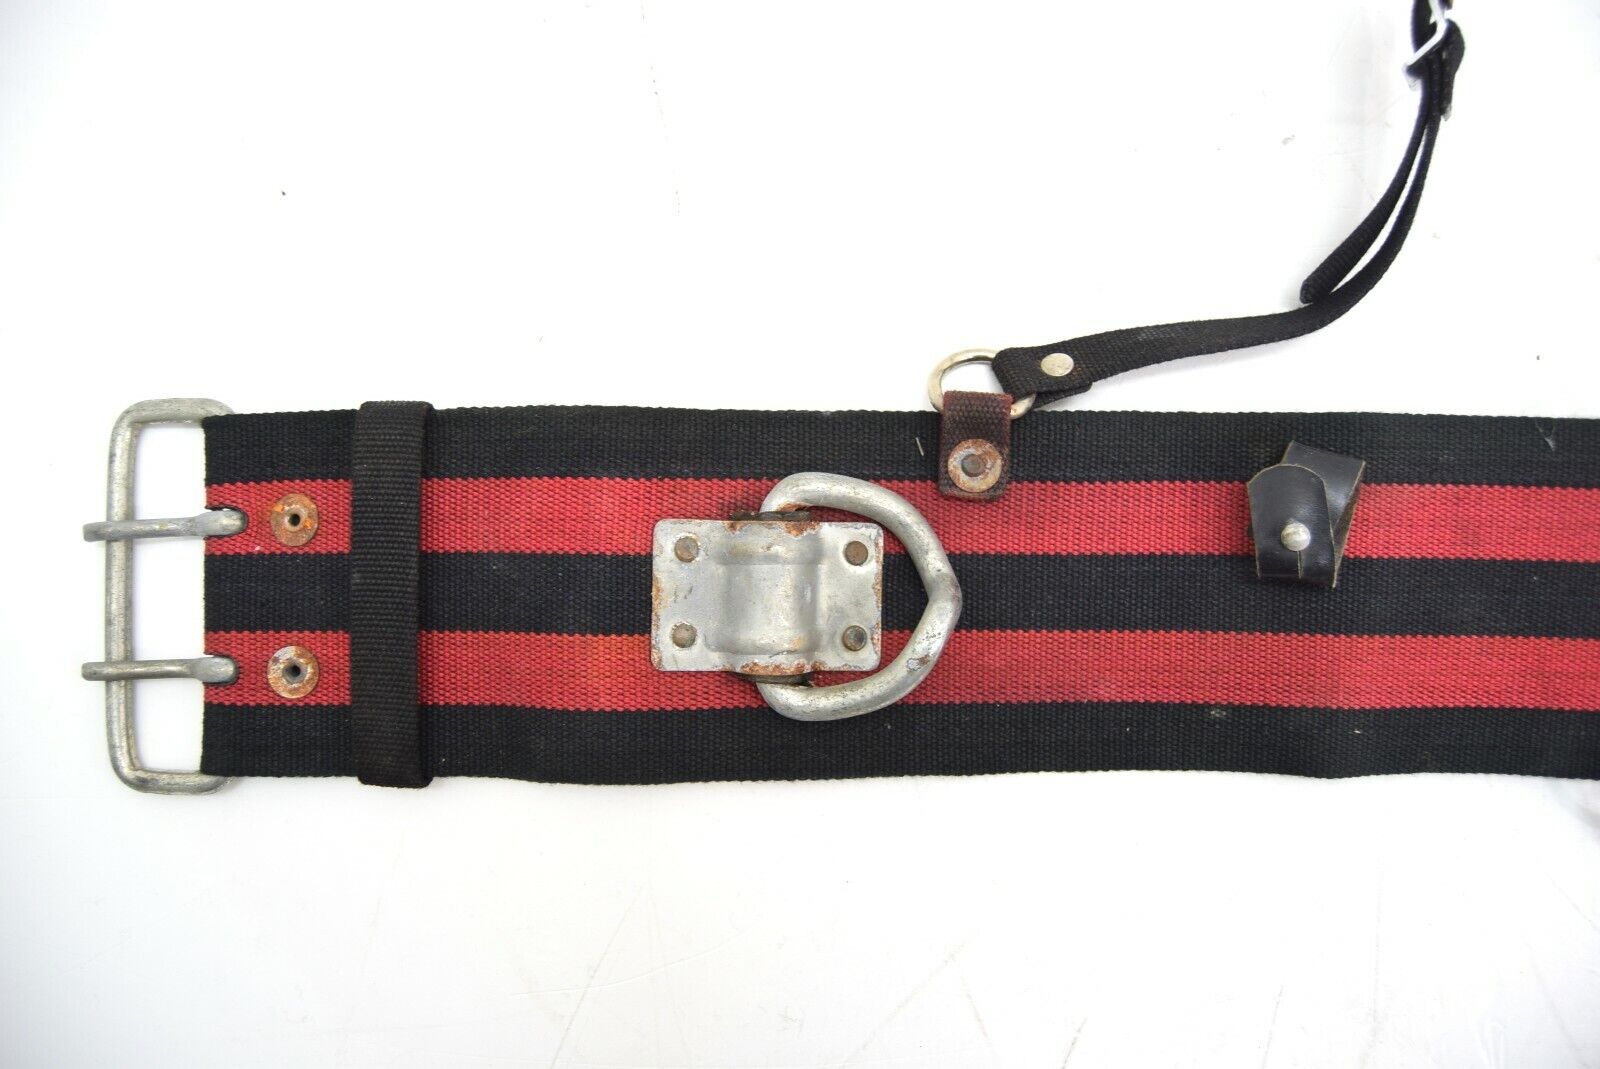 Army / Military Issue Climbing Belt Heavy Duty With Metal Loops Harness Strap